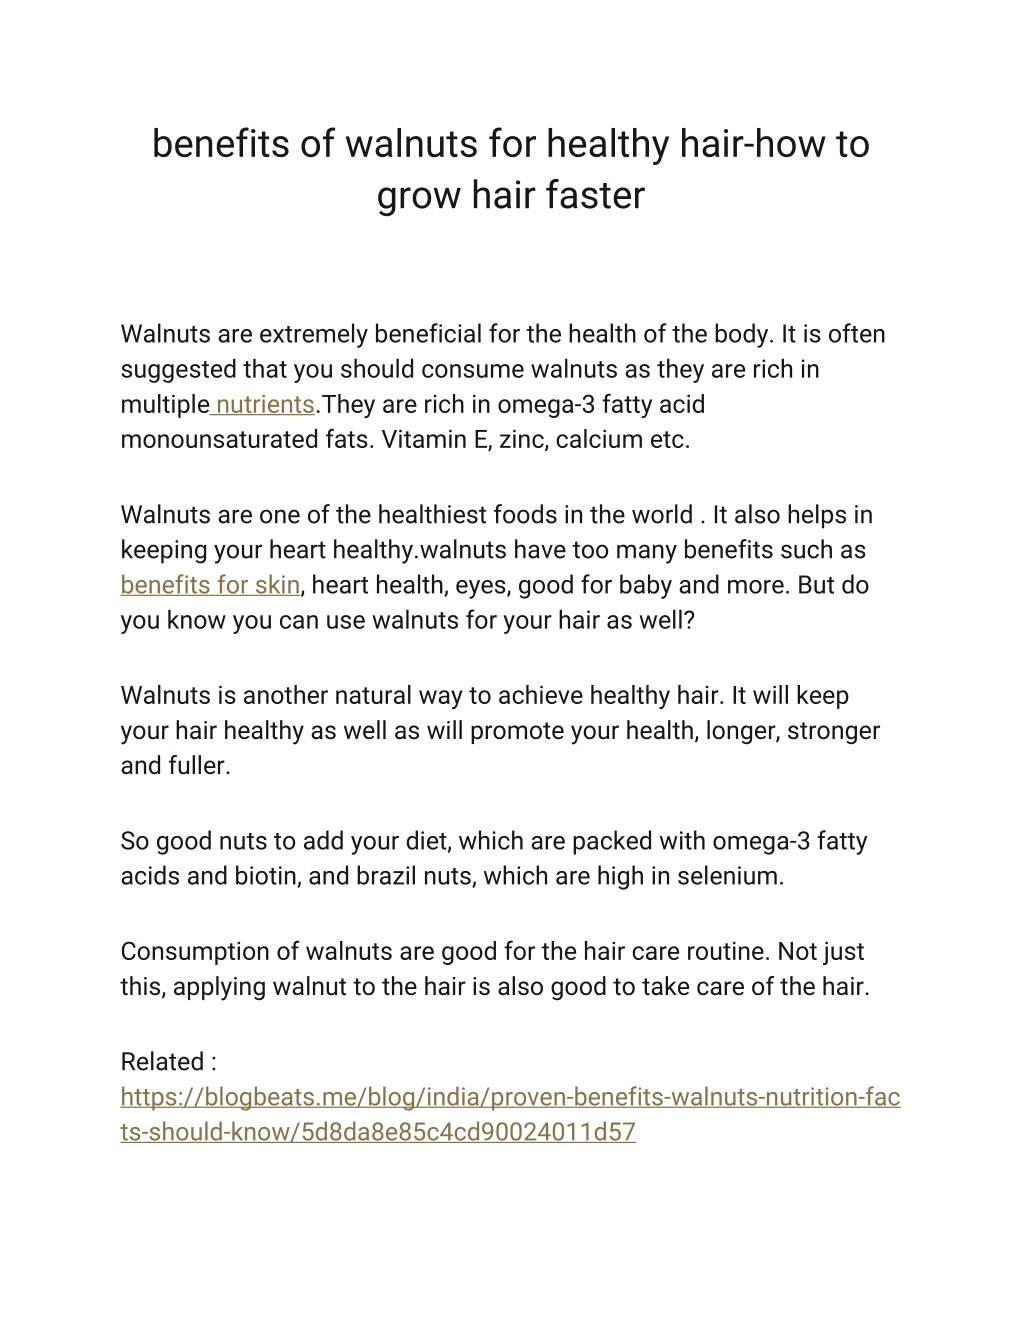 benefits of walnuts for healthy hair how to grow